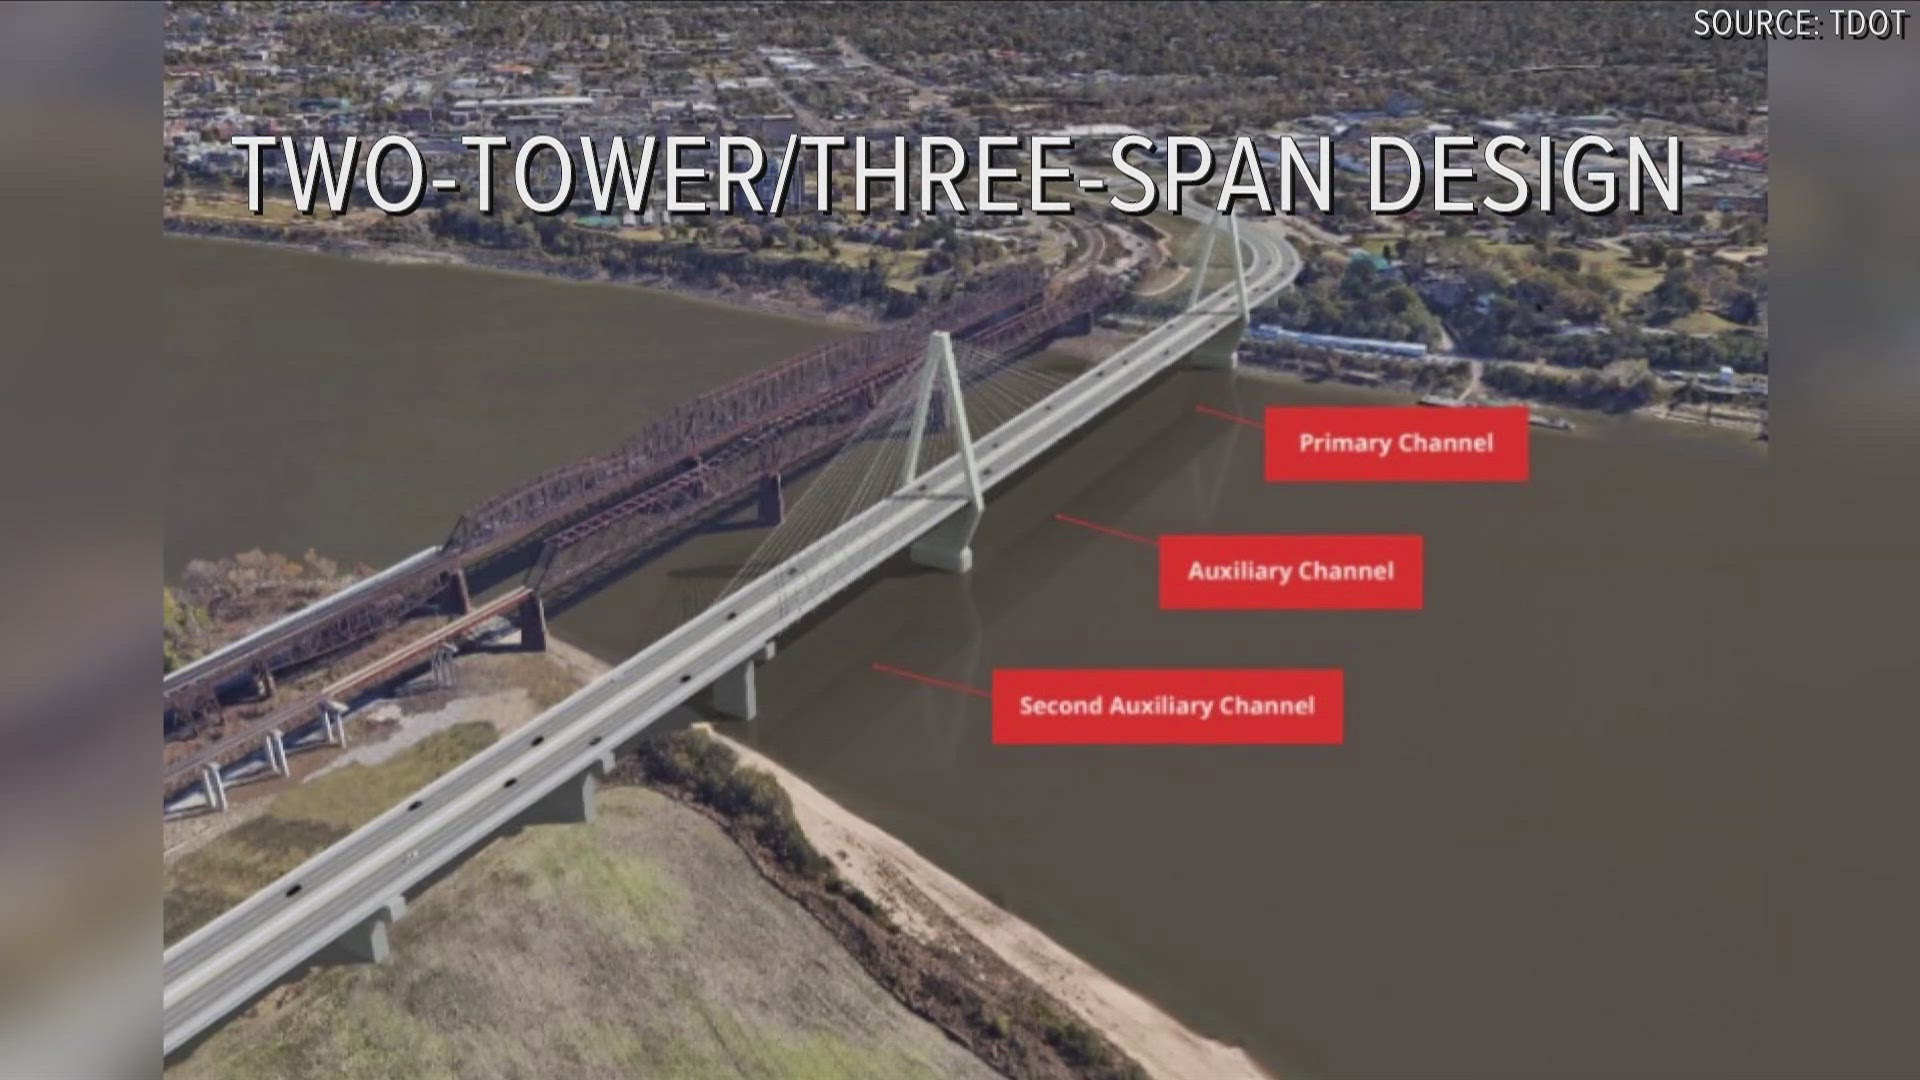 Wider shoulders and six entire lanes are said to be planned in new designs.